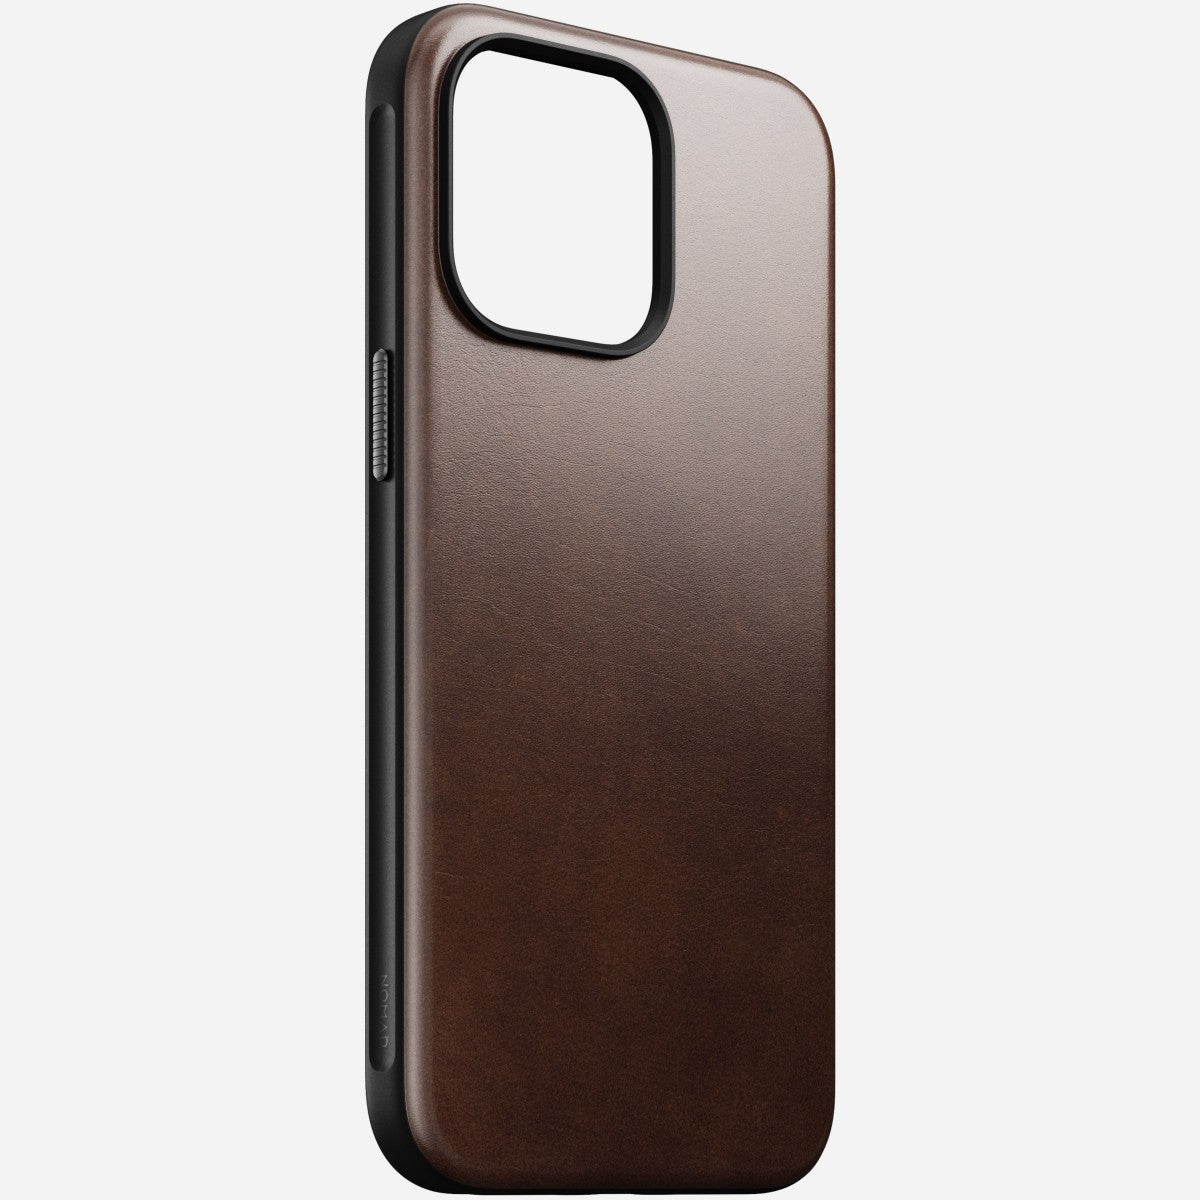 Horween Leather Case for iPhone 15 Series